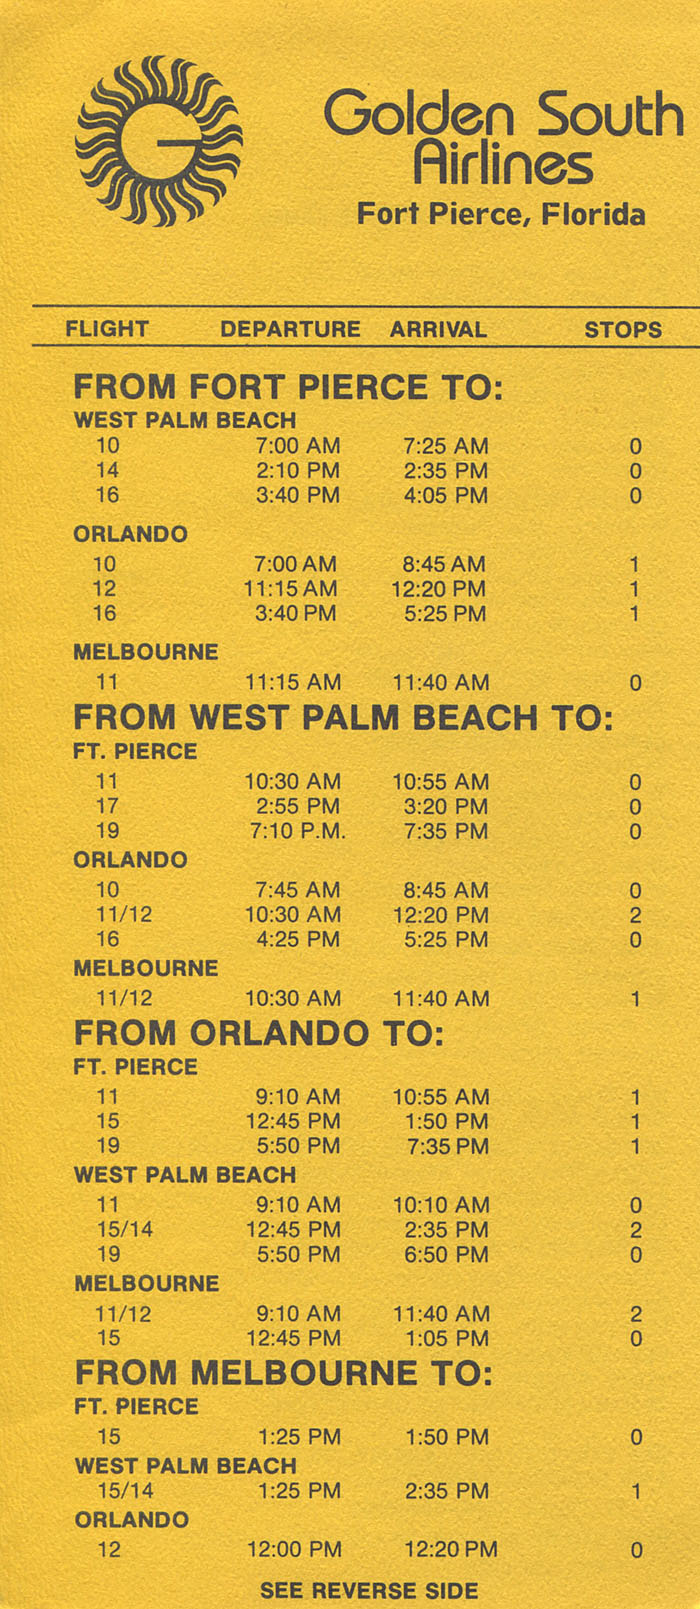 Golden South Airlines timetable schedule